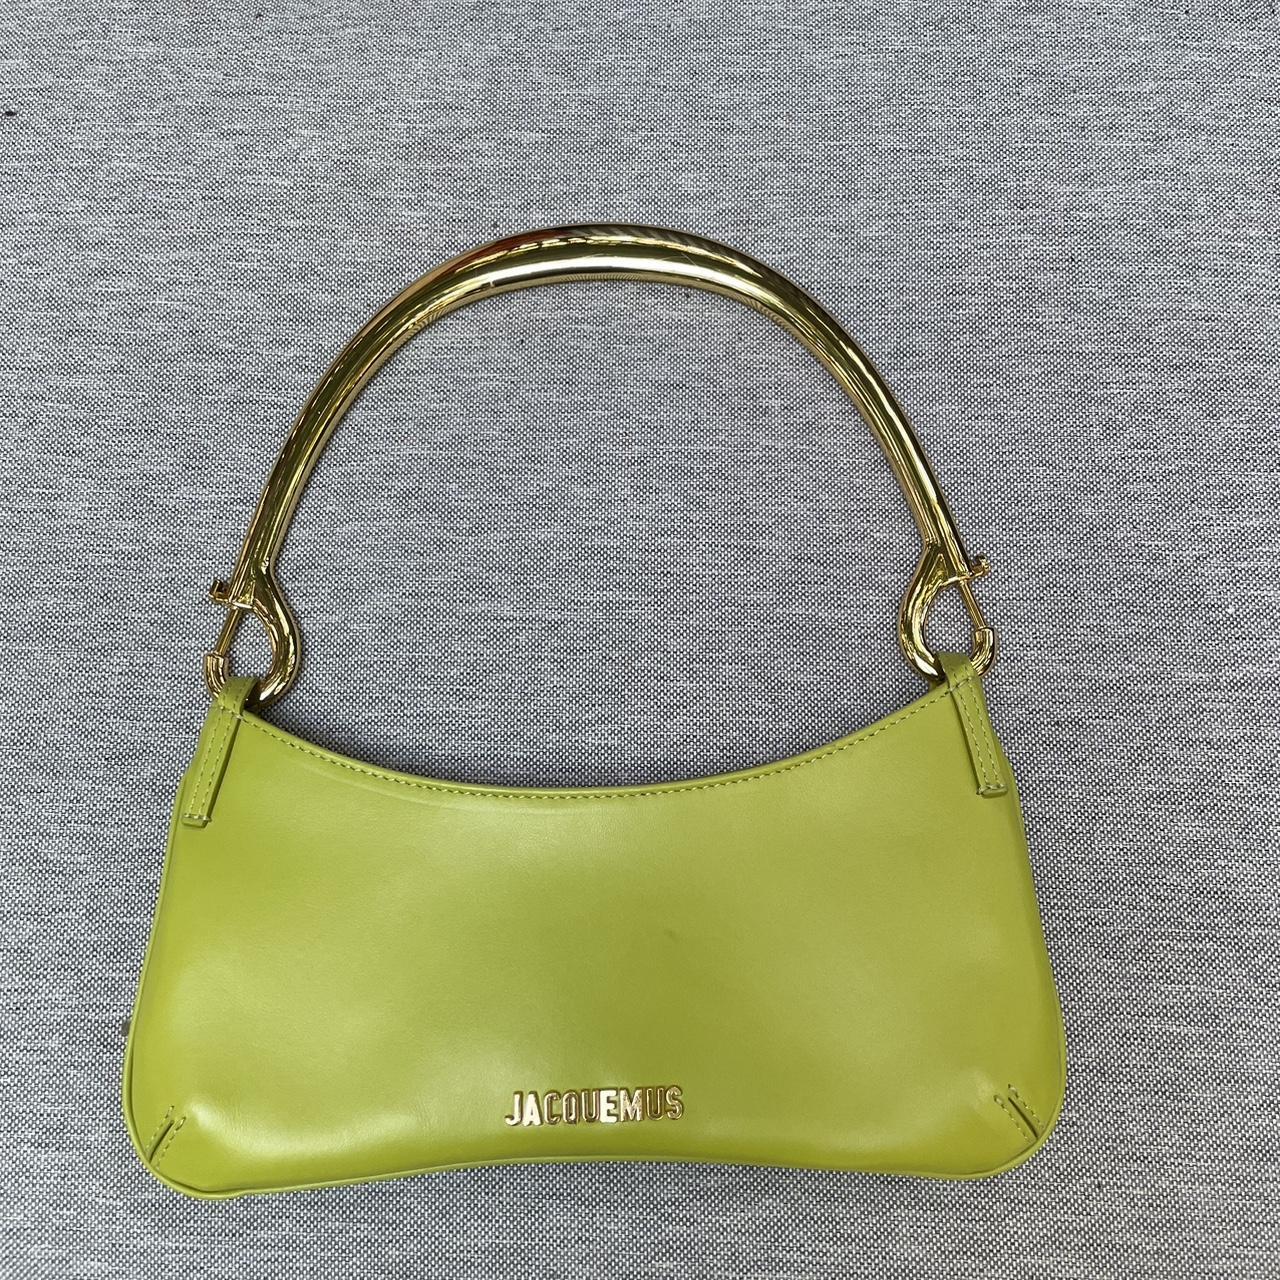 Jacquemus Women's Green and Gold Bag (3)